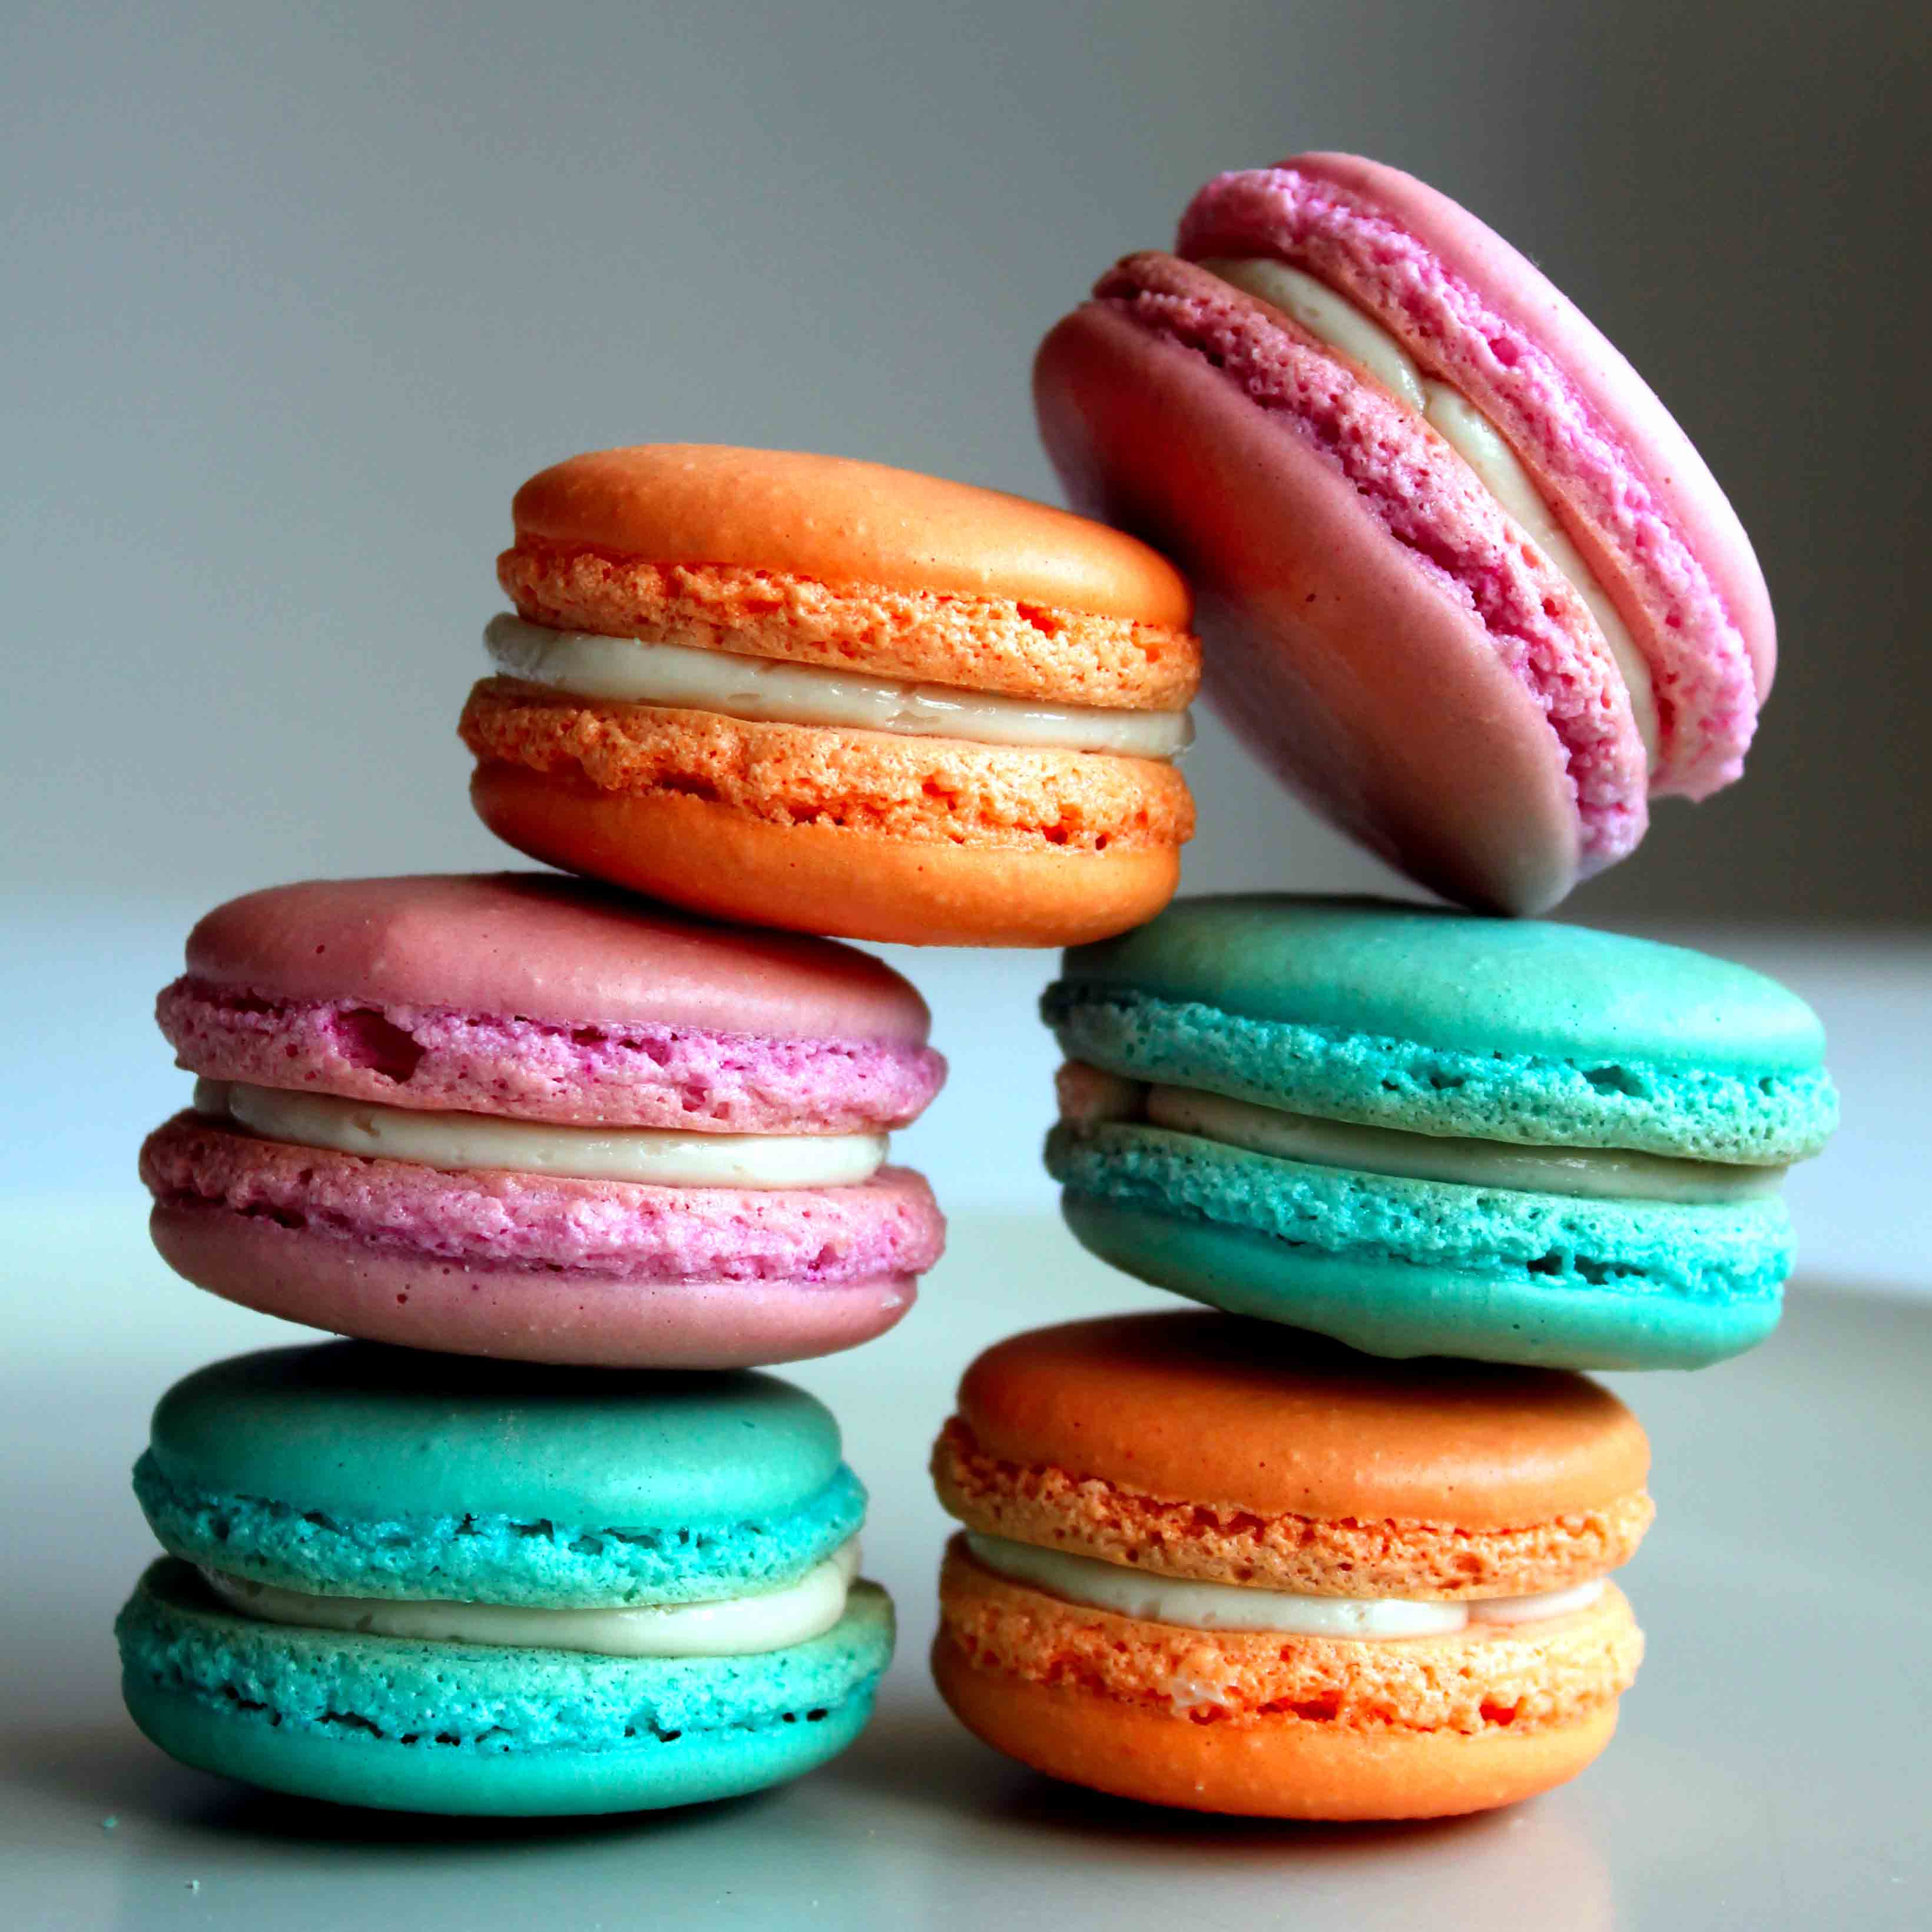 The French Macaron Experience